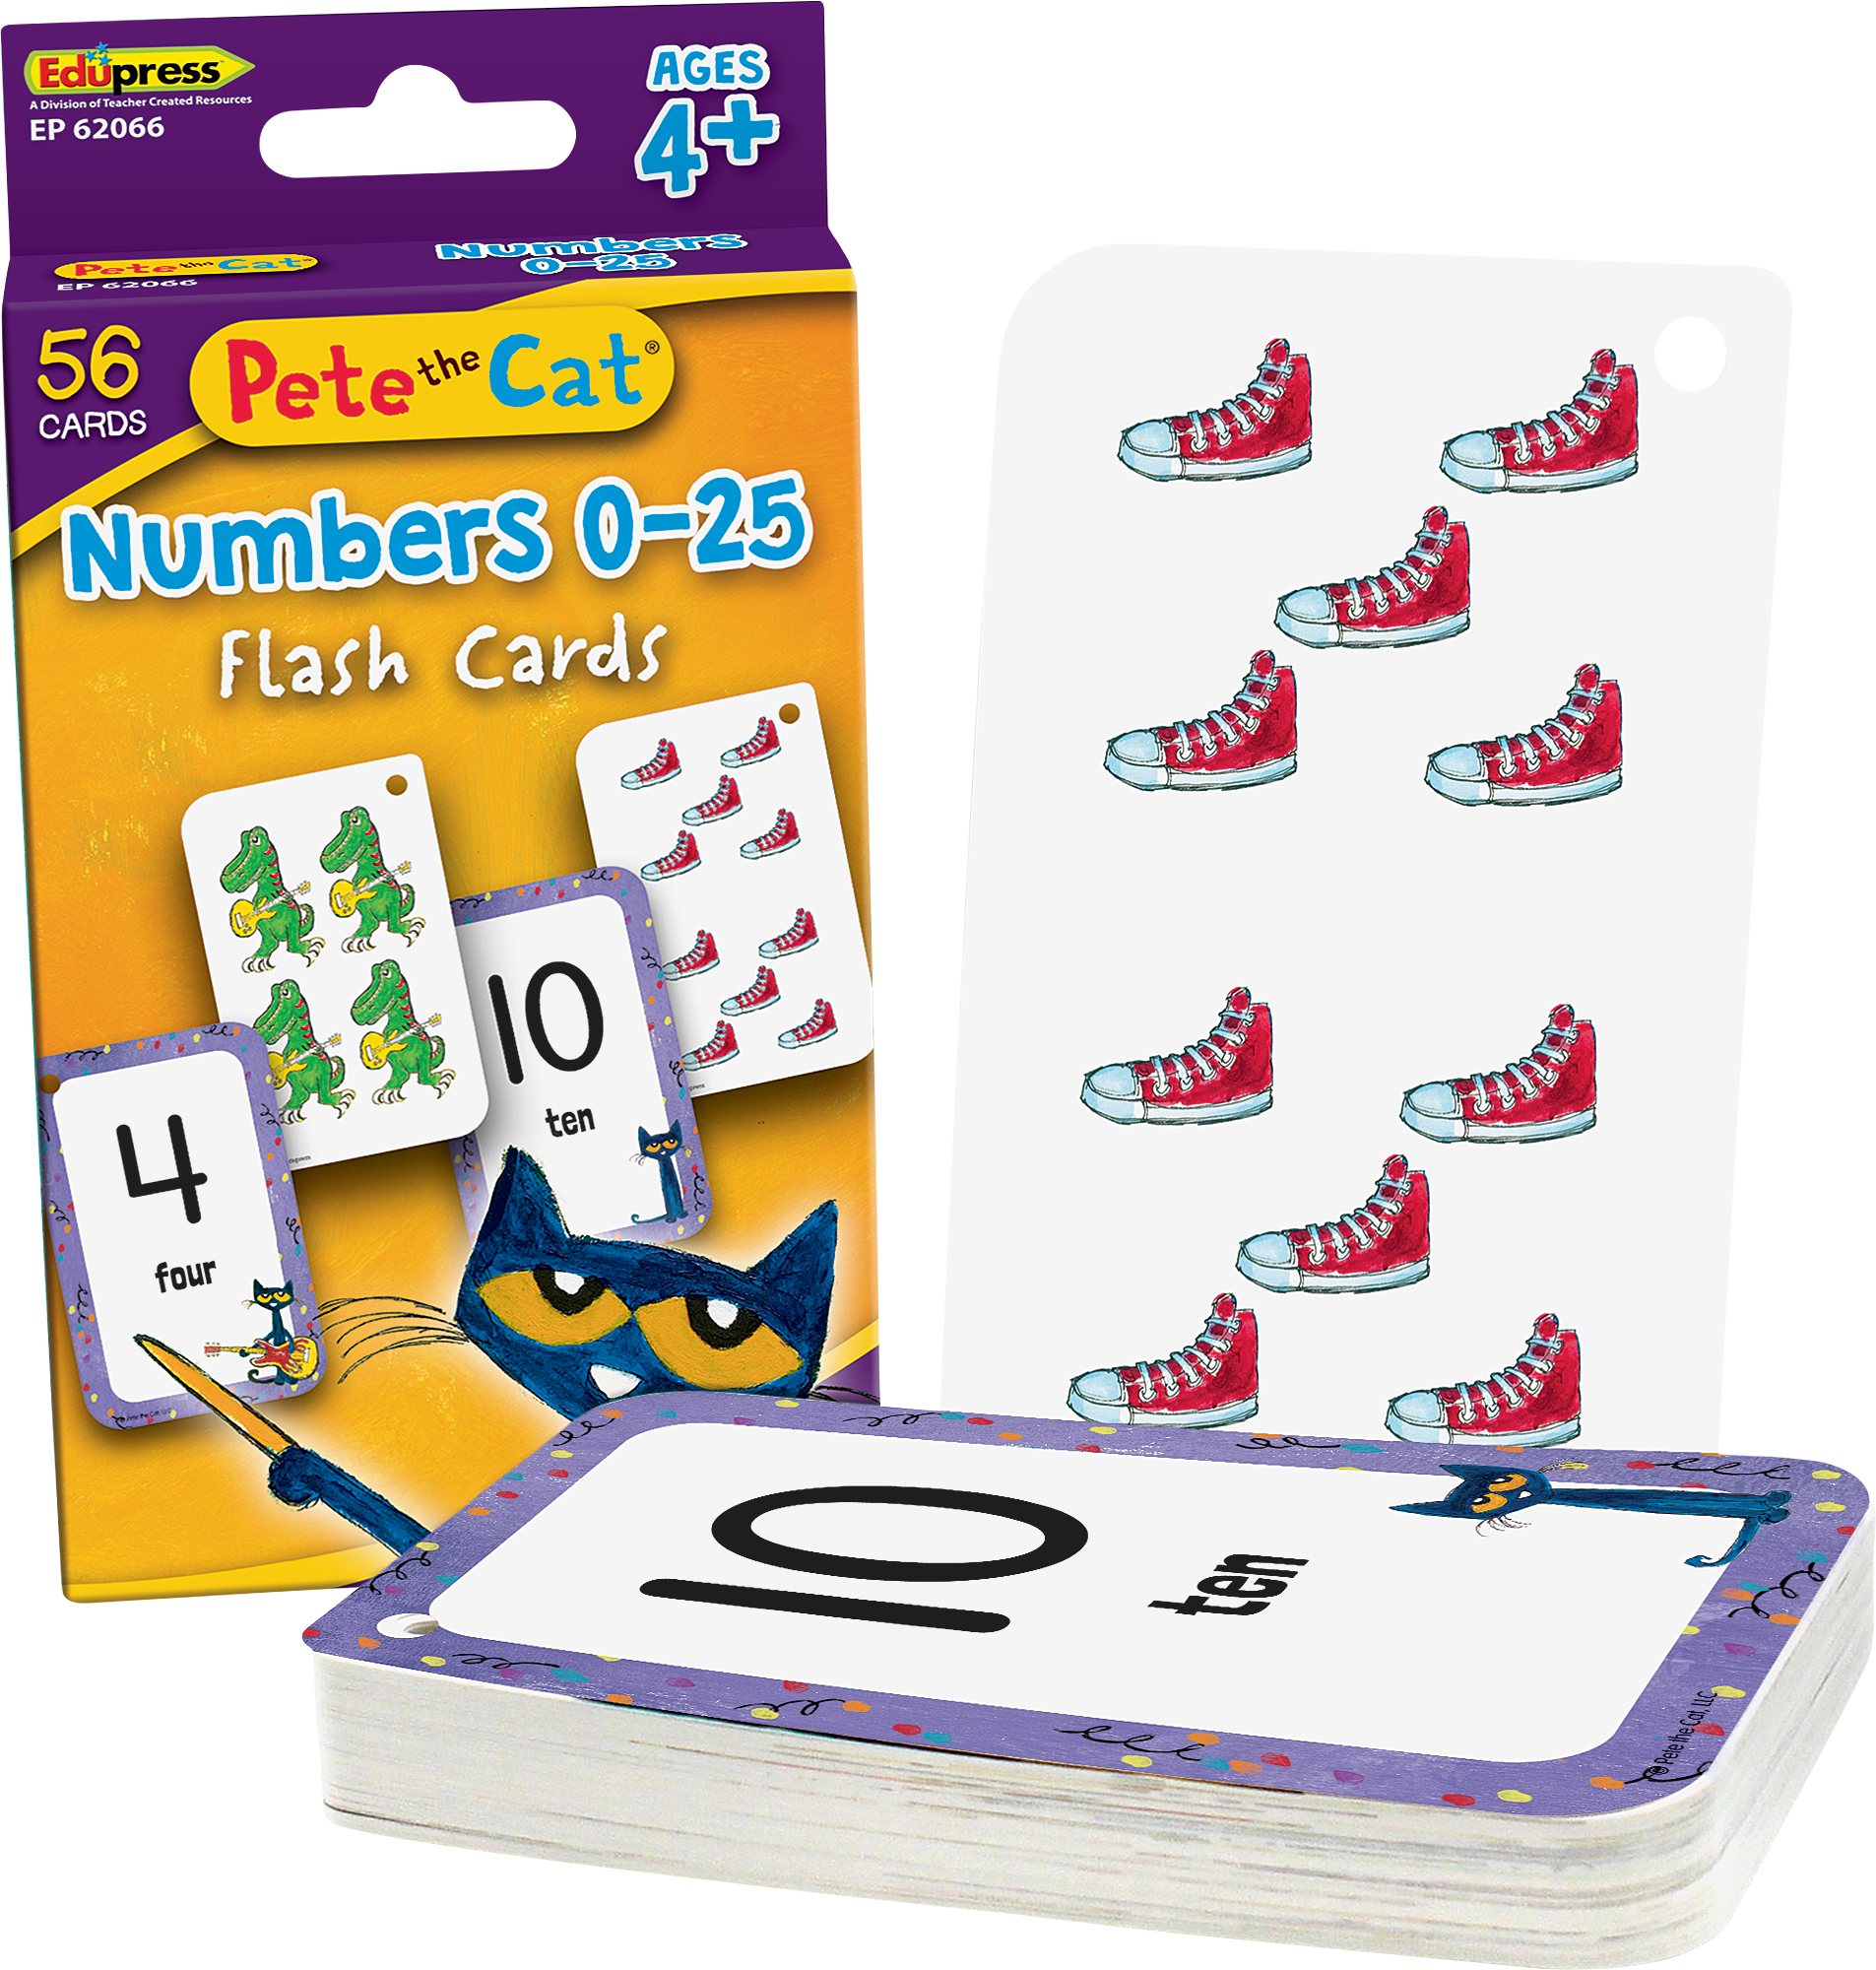 Pete the CatÂ® Numbers 0â€“25 Flash Cards